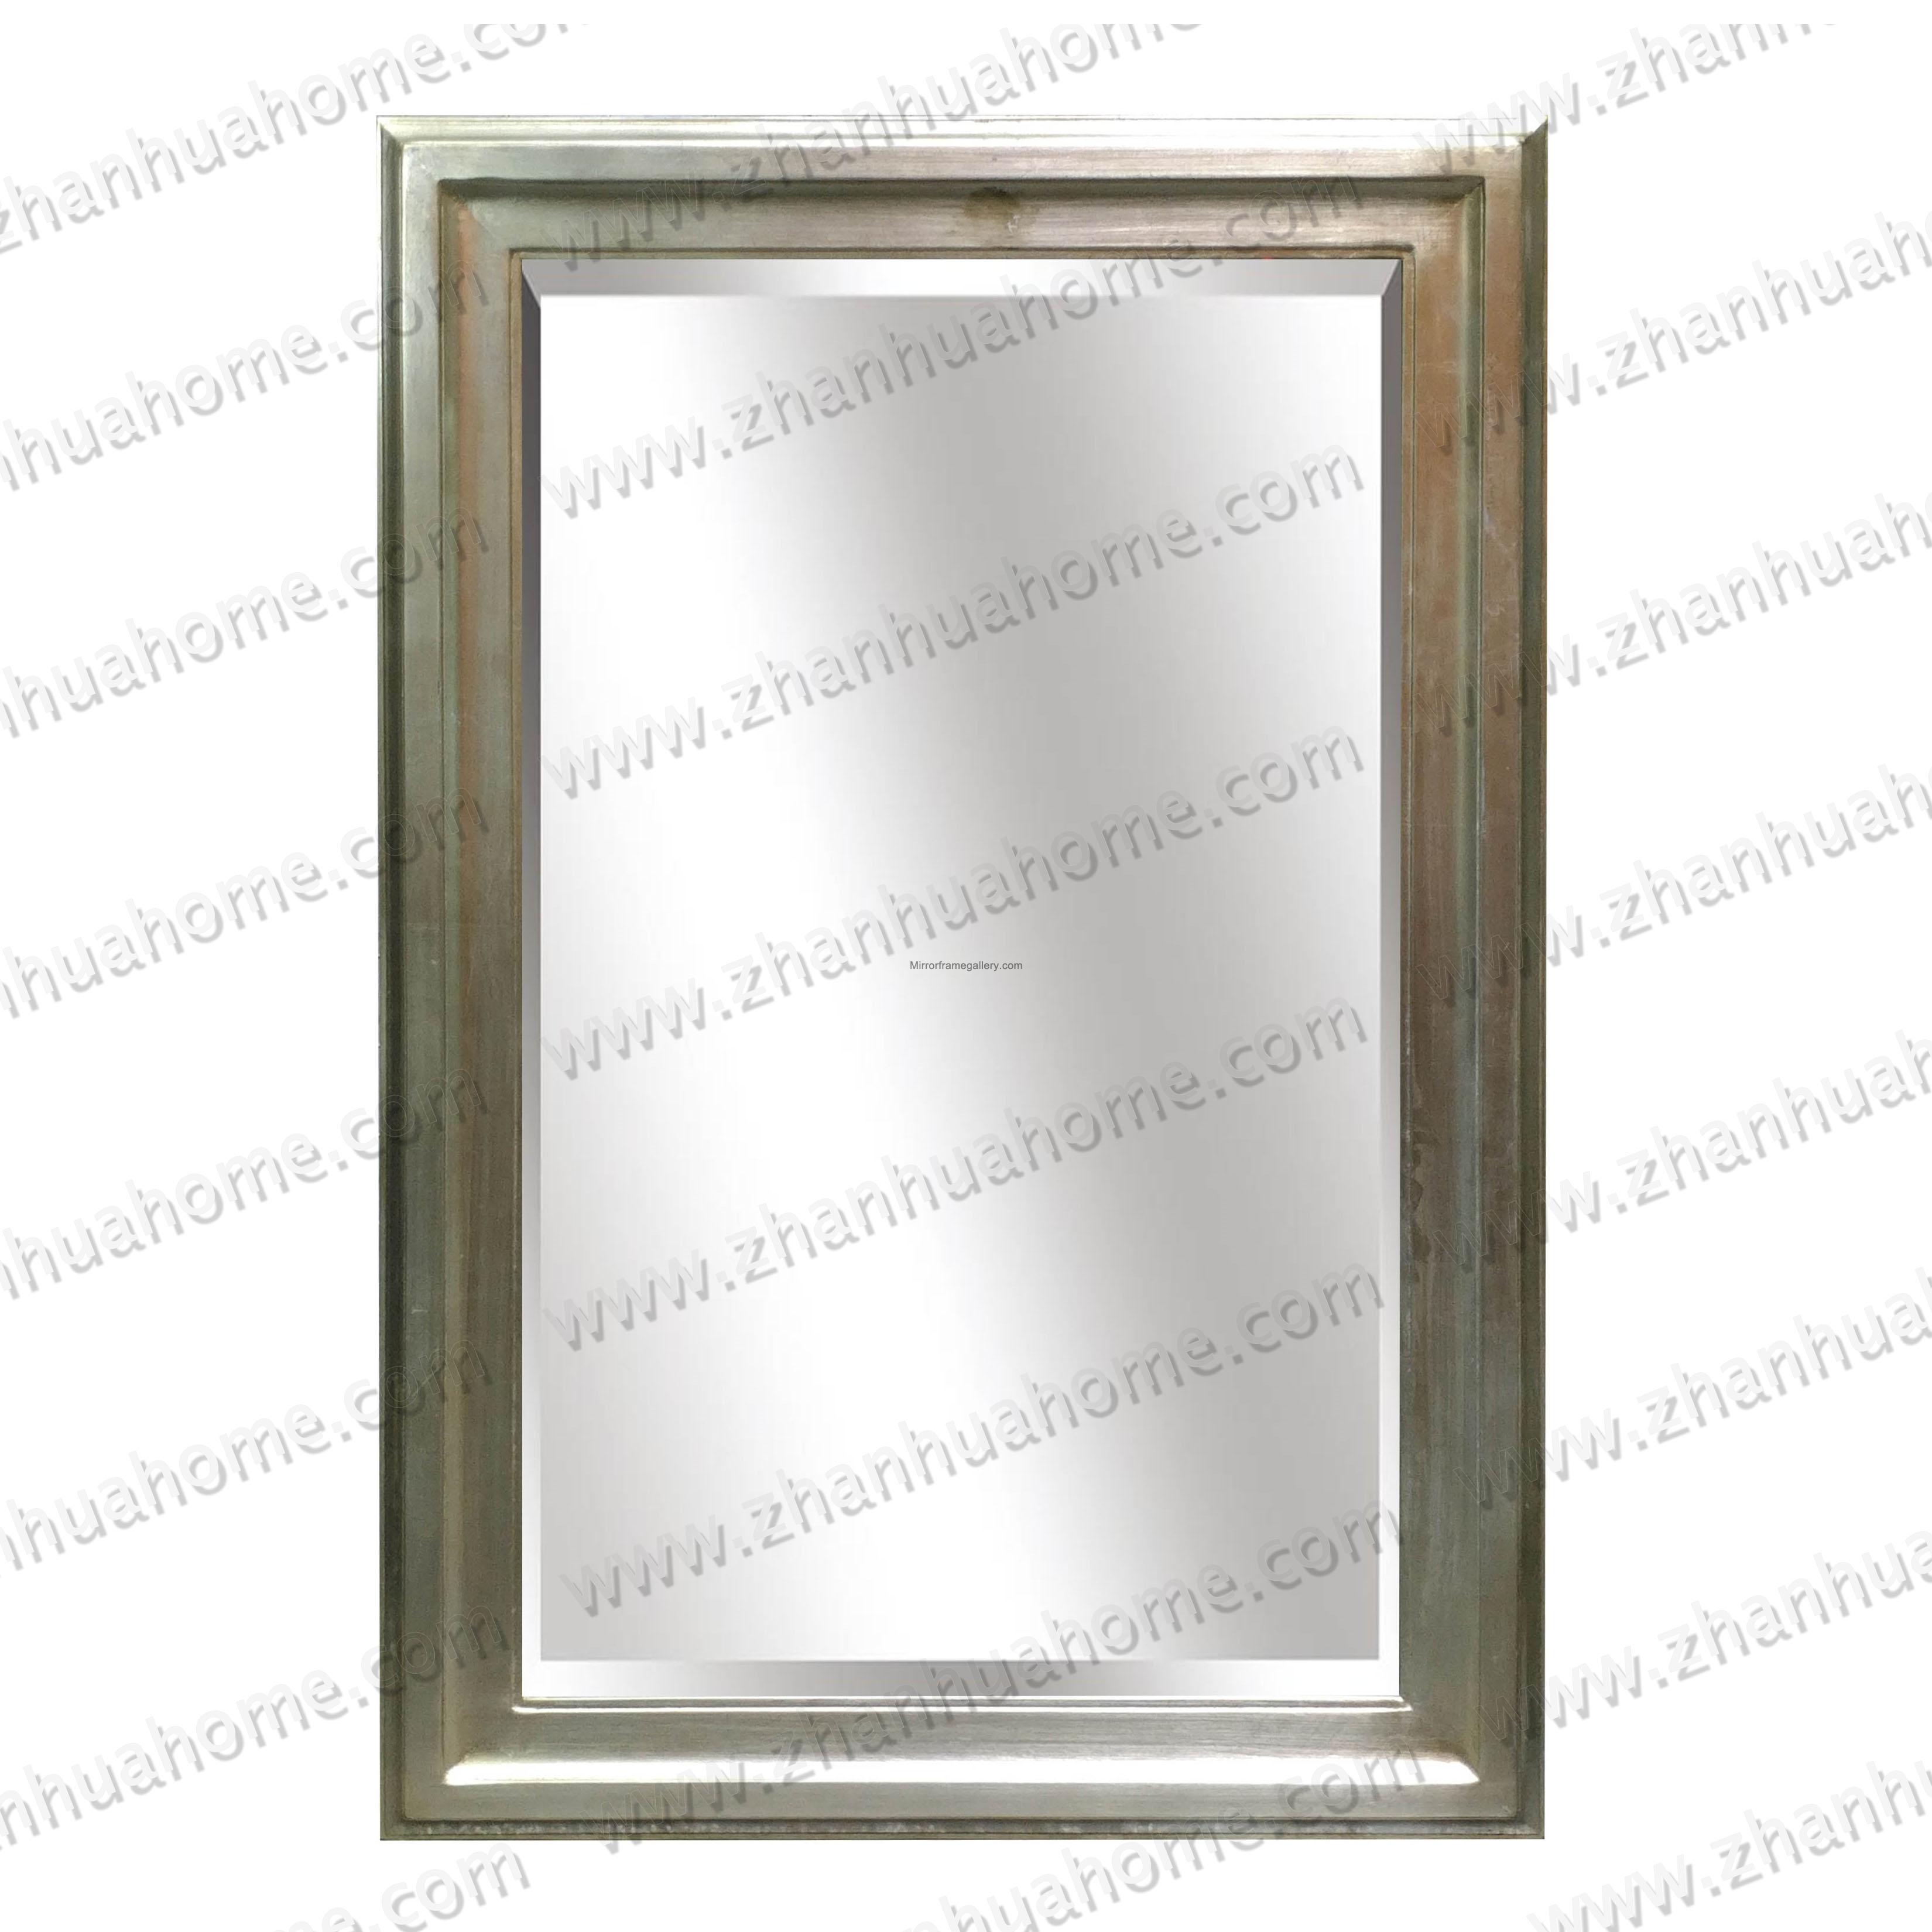 Silver Foiling Wall Mirror Frame